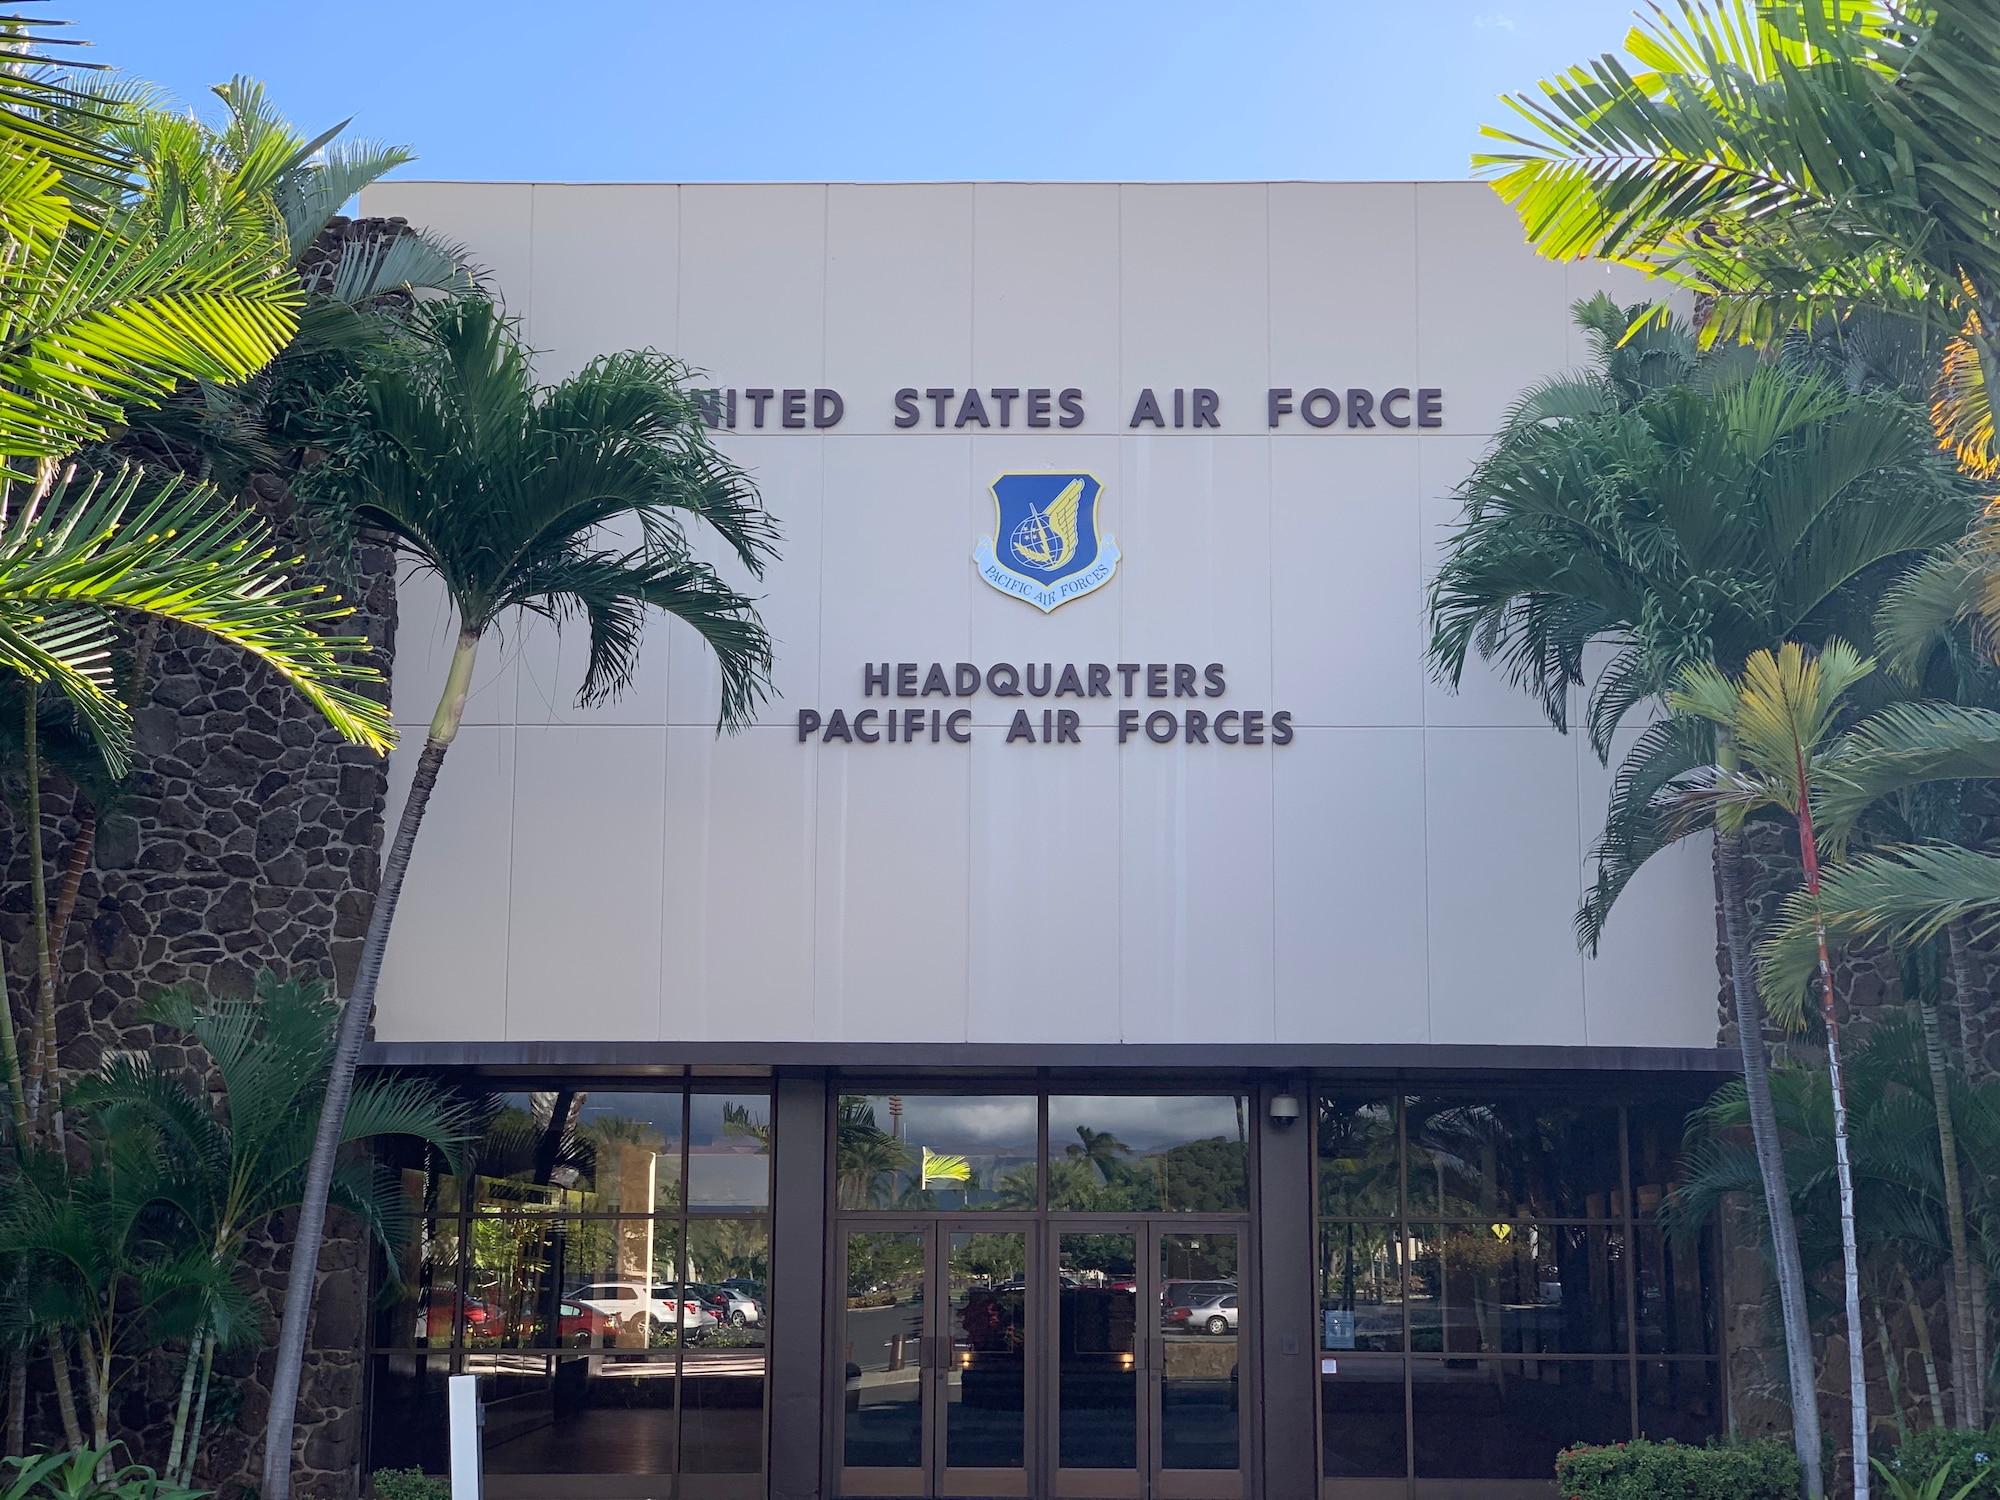 The Far East Air Forces (FEAF), or PACAF as we know it today, celebrates 75 years of service on August 3, 2019. PACAF's humble origins start as a subordinate command to the U.S. Army Forces Far East, headquartered in Brisbane, Australia, and led by Lt Gen George Kenney. By 1945, the command expanded to include three Numbered Air Forces supporting operations in the Pacific Theater. (Courtesy Photo)